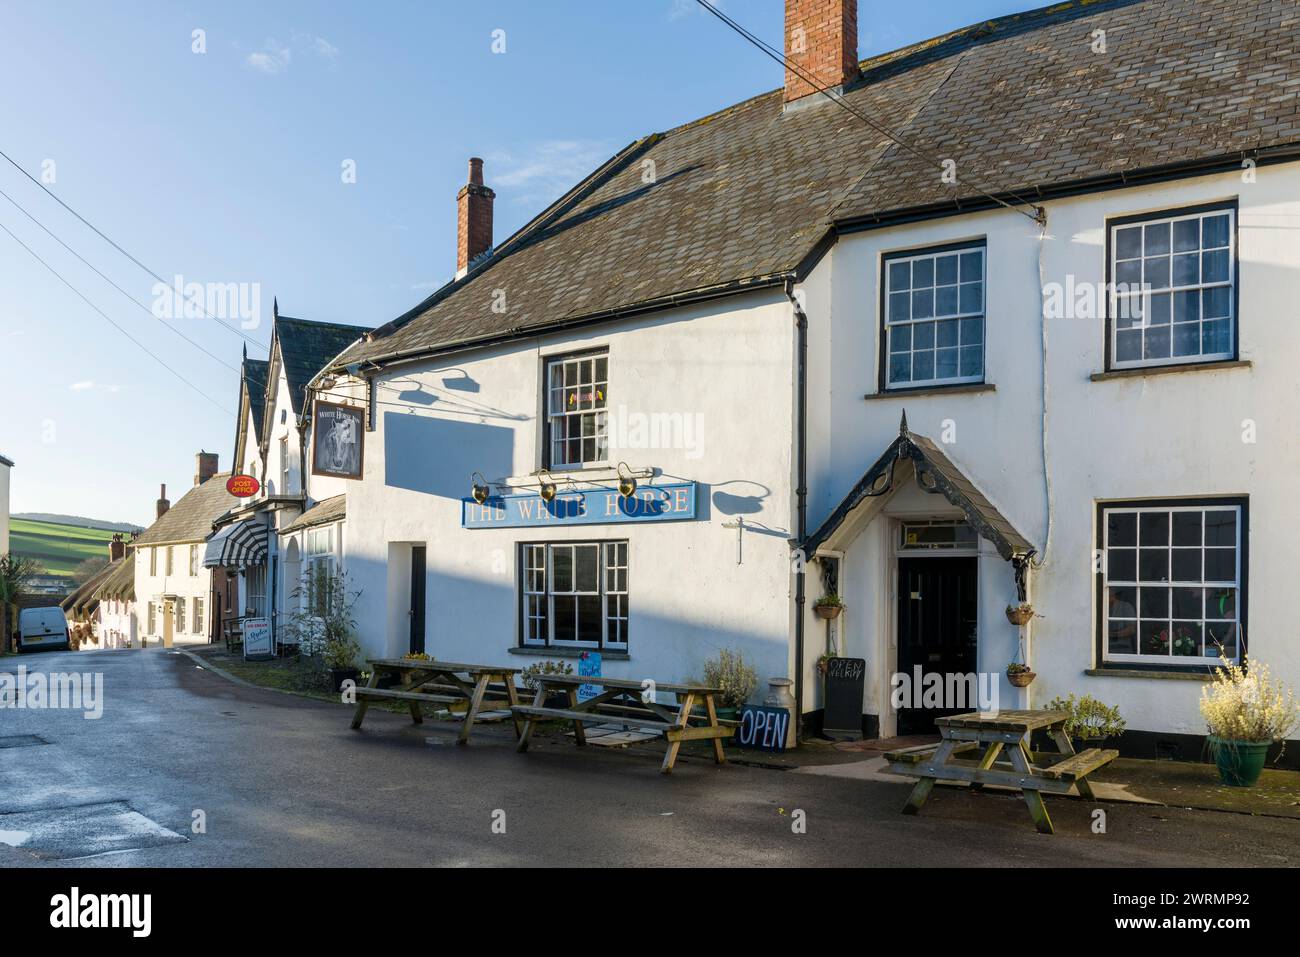 The White Horse public house on the High Street of Stogumber village in Somerset, England. Stock Photo